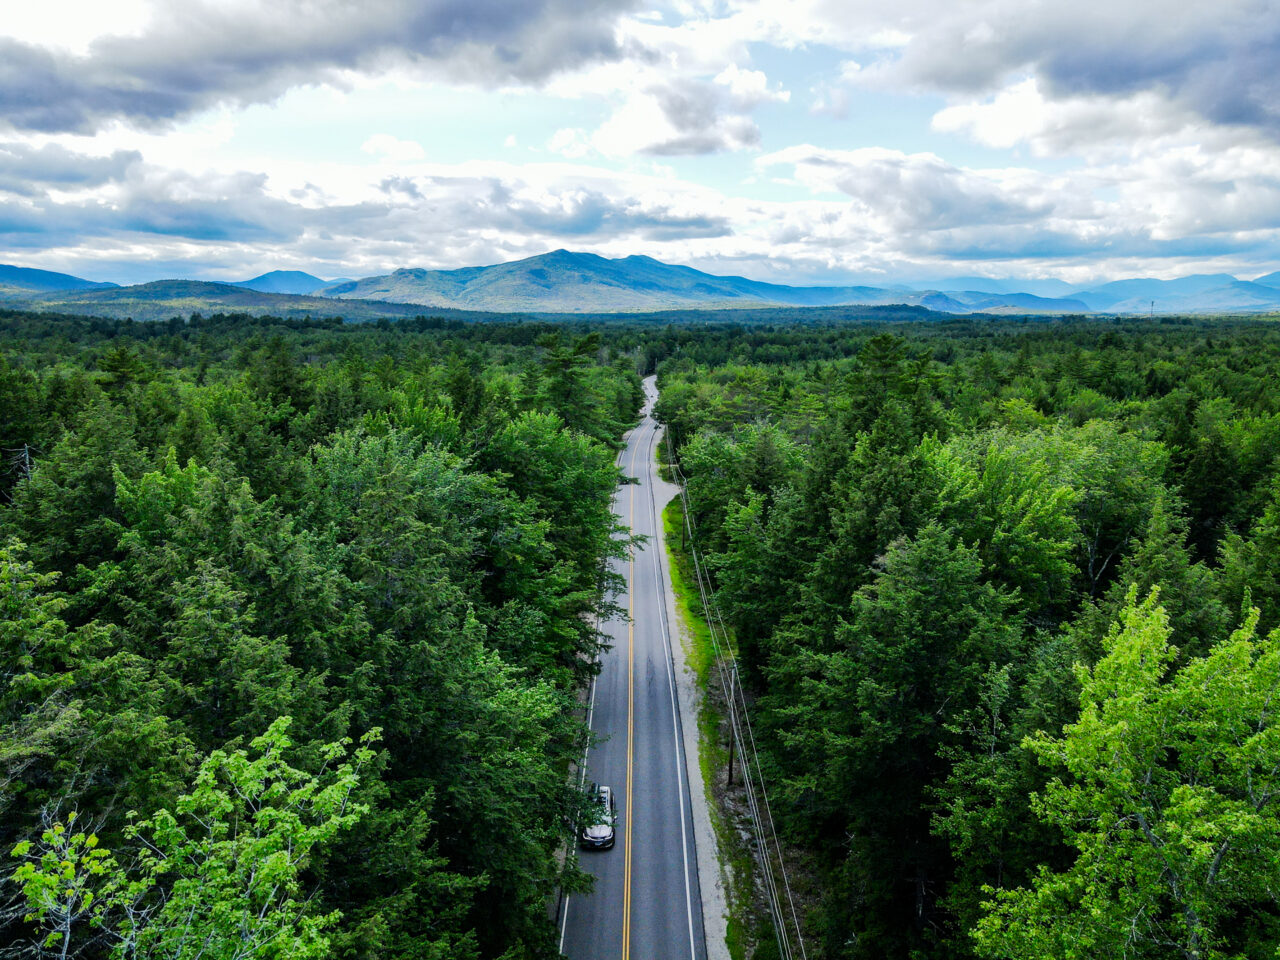 A road leading to the White Mountains in New Hampshire.